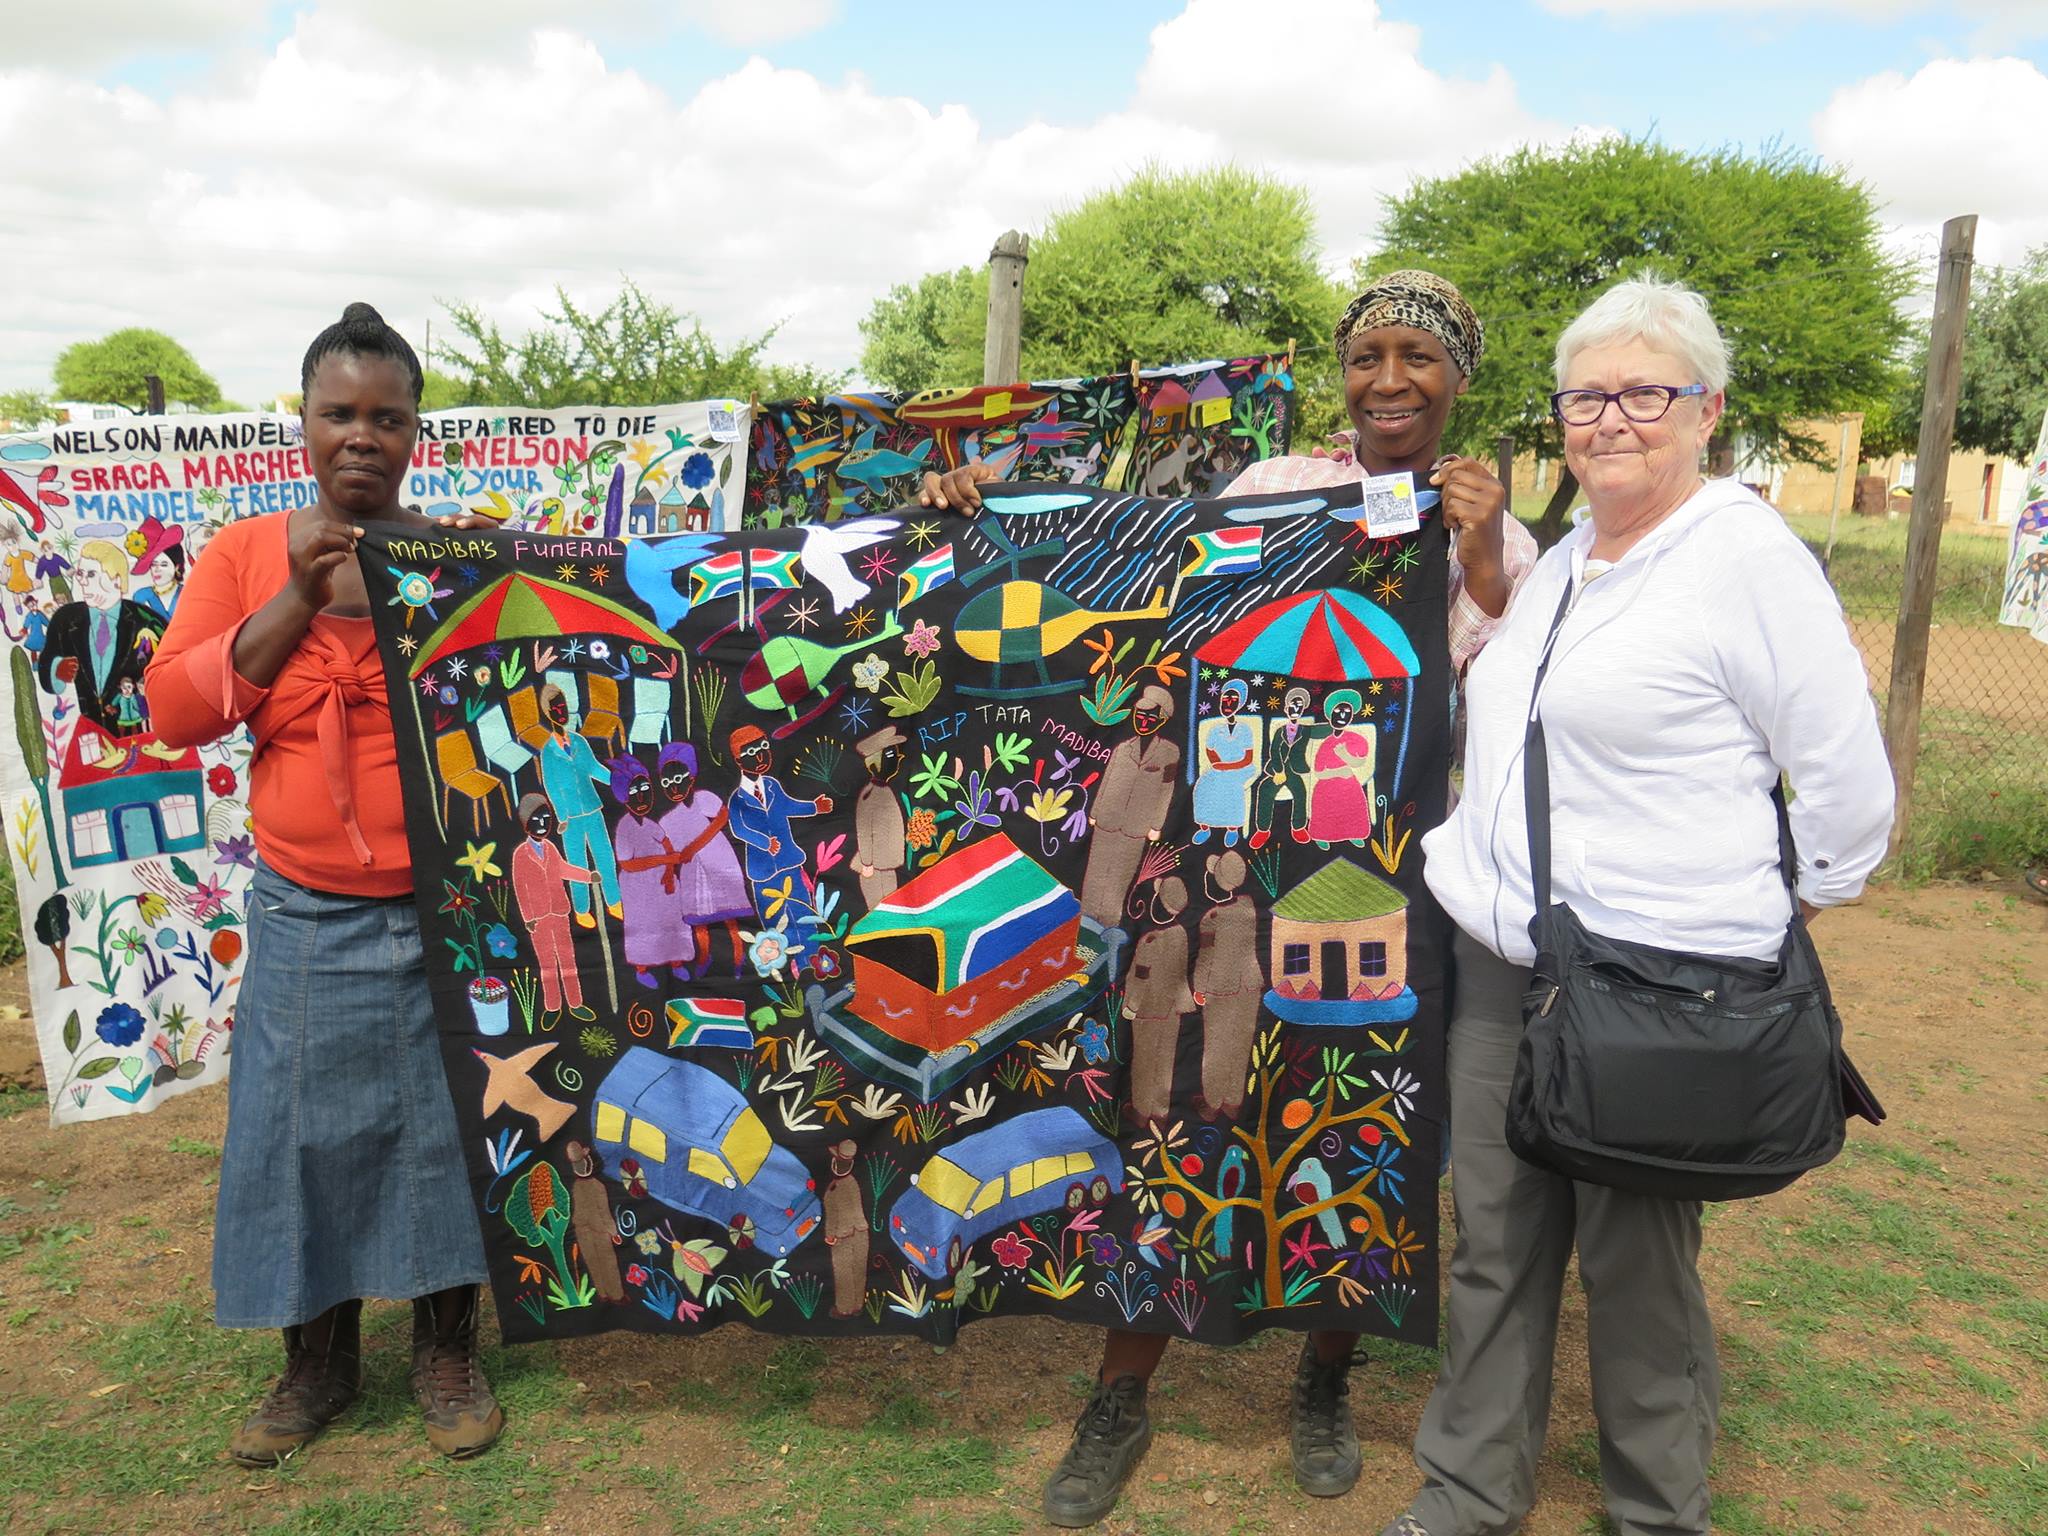 African Threads Tours to South Africa led by textile artist Valerie Hearder, born and raised in South Africa and now living in Nova Scotia, Canada. Valerie has won numerous awards for her own art quilts, written two books on her techniques, and participates actively with other textile artists in her community and online.